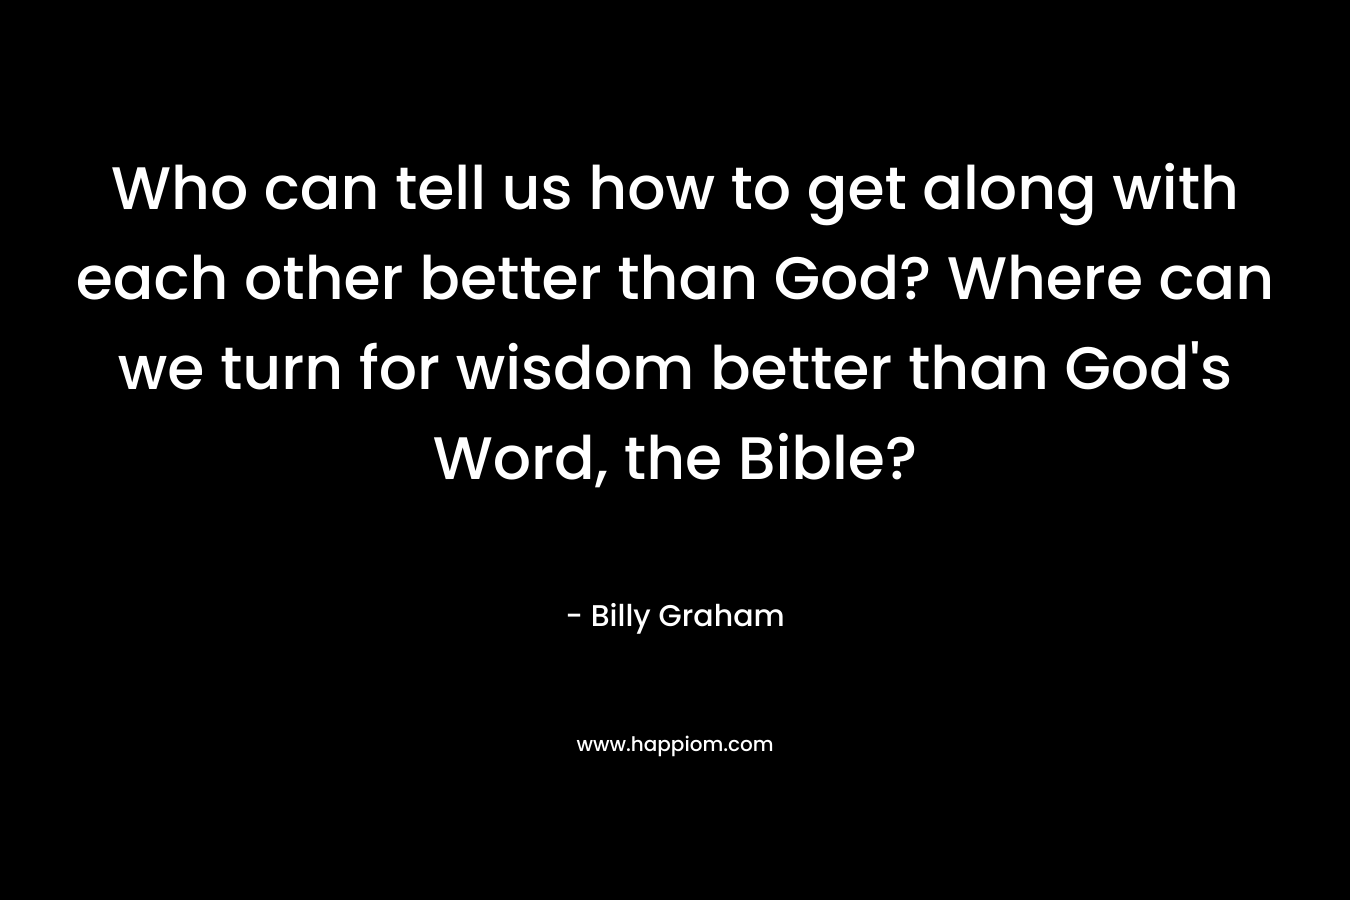 Who can tell us how to get along with each other better than God? Where can we turn for wisdom better than God's Word, the Bible?